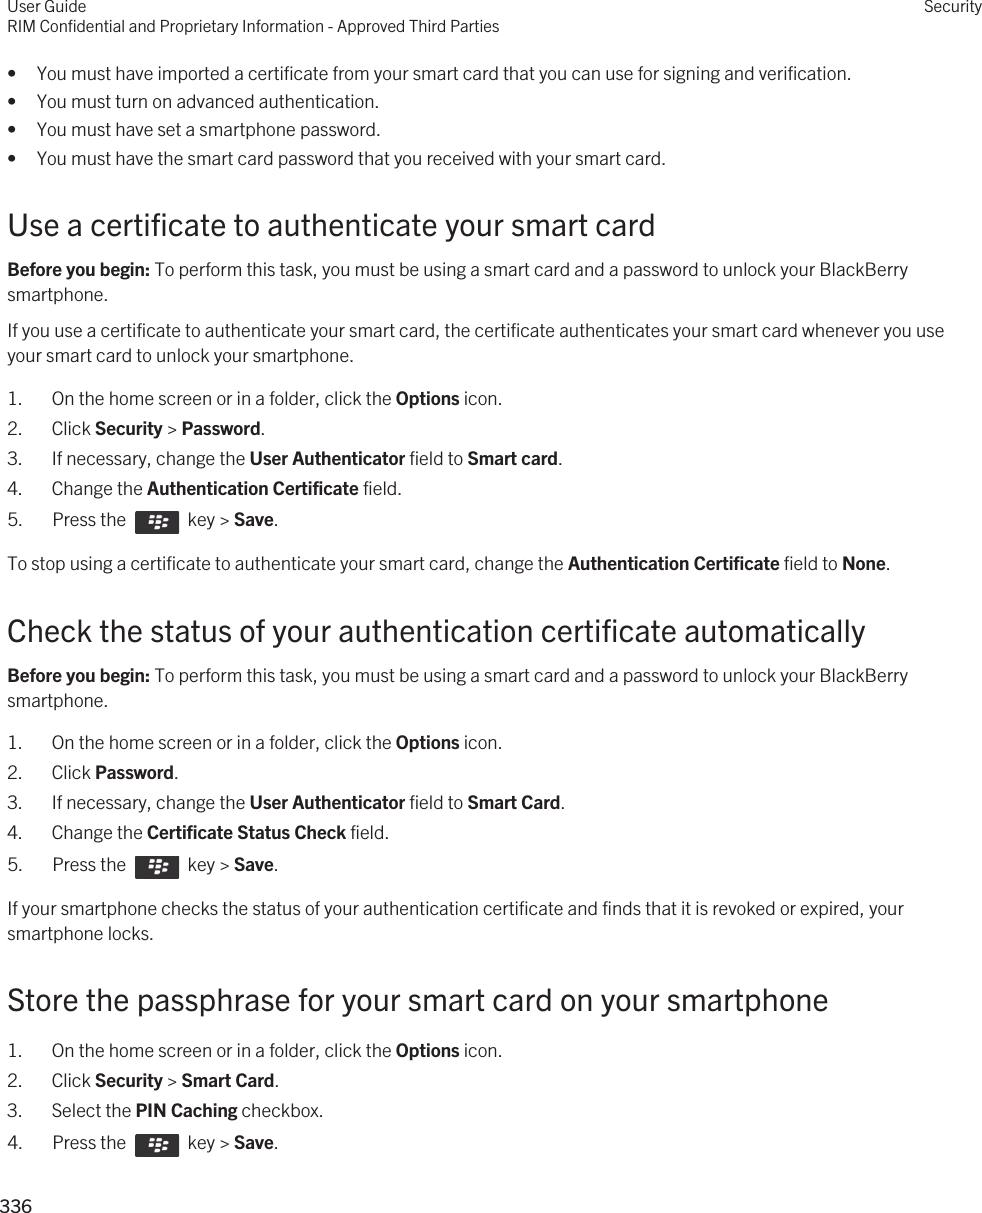 • You must have imported a certificate from your smart card that you can use for signing and verification.• You must turn on advanced authentication.• You must have set a smartphone password.• You must have the smart card password that you received with your smart card.Use a certificate to authenticate your smart cardBefore you begin: To perform this task, you must be using a smart card and a password to unlock your BlackBerry smartphone. If you use a certificate to authenticate your smart card, the certificate authenticates your smart card whenever you use your smart card to unlock your smartphone.1. On the home screen or in a folder, click the Options icon.2. Click Security &gt; Password.3. If necessary, change the User Authenticator field to Smart card.4. Change the Authentication Certificate field.5.  Press the    key &gt; Save. To stop using a certificate to authenticate your smart card, change the Authentication Certificate field to None.Check the status of your authentication certificate automaticallyBefore you begin: To perform this task, you must be using a smart card and a password to unlock your BlackBerry smartphone. 1. On the home screen or in a folder, click the Options icon.2. Click Password.3. If necessary, change the User Authenticator field to Smart Card.4. Change the Certificate Status Check field.5.  Press the    key &gt; Save. If your smartphone checks the status of your authentication certificate and finds that it is revoked or expired, your smartphone locks.Store the passphrase for your smart card on your smartphone1. On the home screen or in a folder, click the Options icon.2. Click Security &gt; Smart Card.3. Select the PIN Caching checkbox.4.  Press the    key &gt; Save. User GuideRIM Confidential and Proprietary Information - Approved Third PartiesSecurity336 